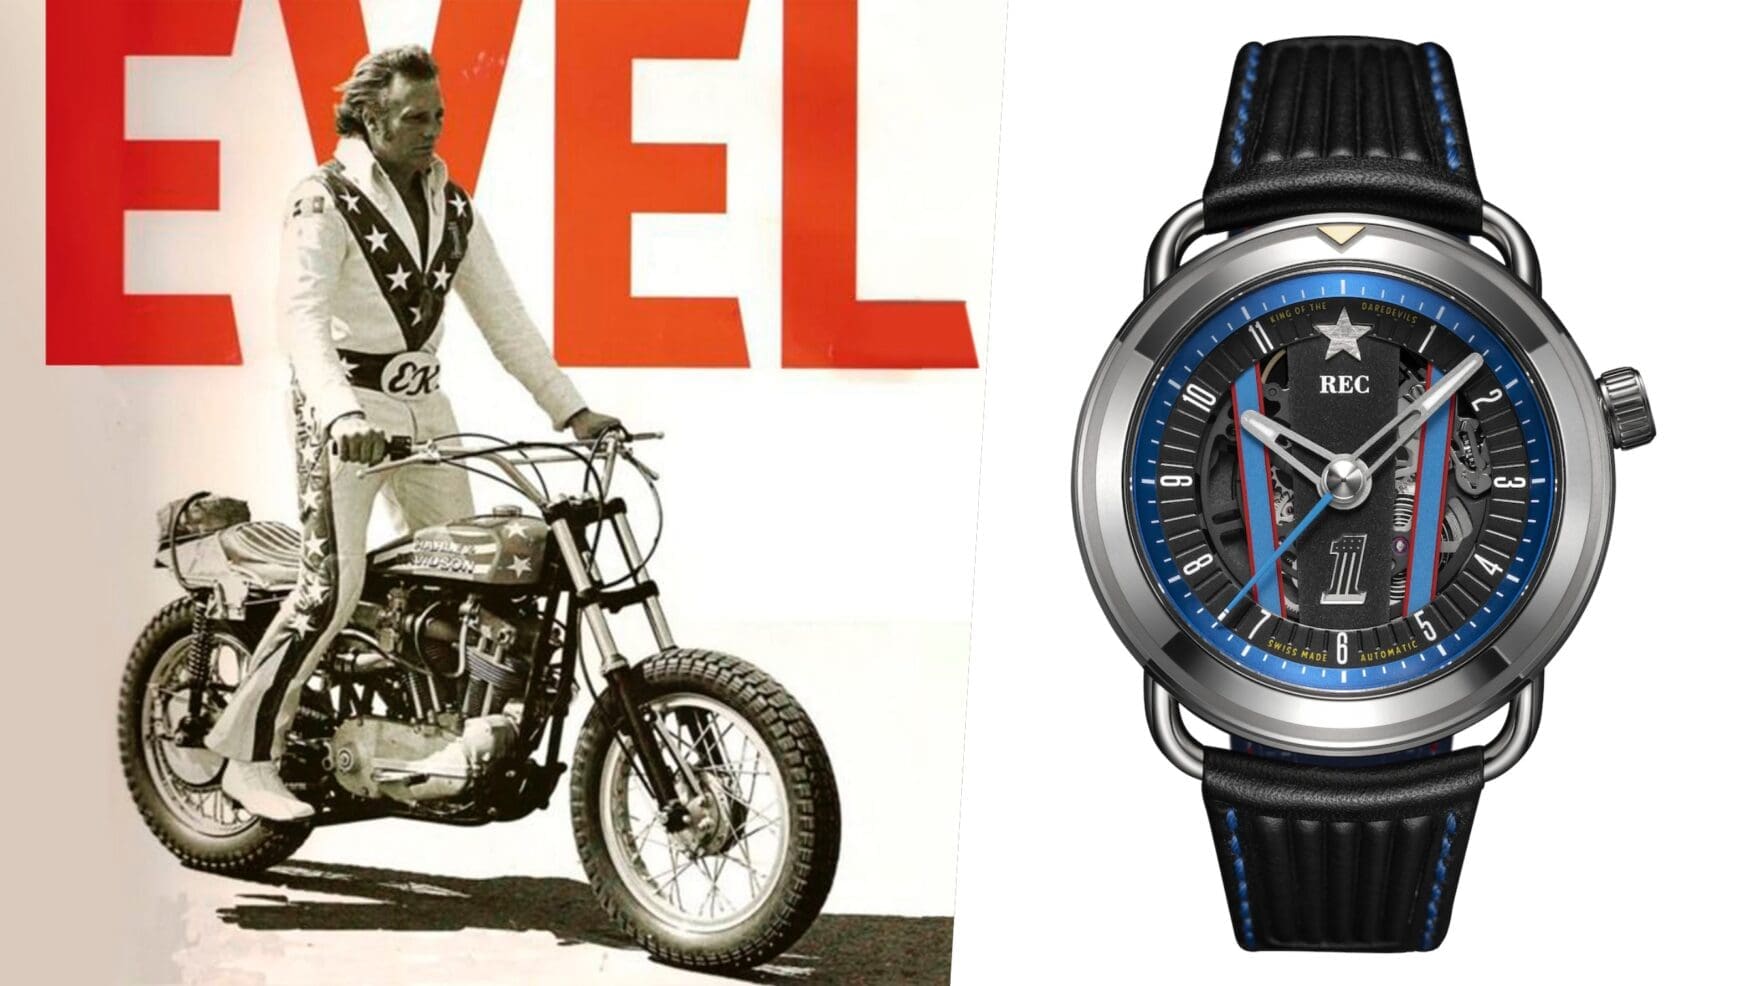 Pure Evel – The REC TTT Knievel is a striking tribute to the King of the Daredevils